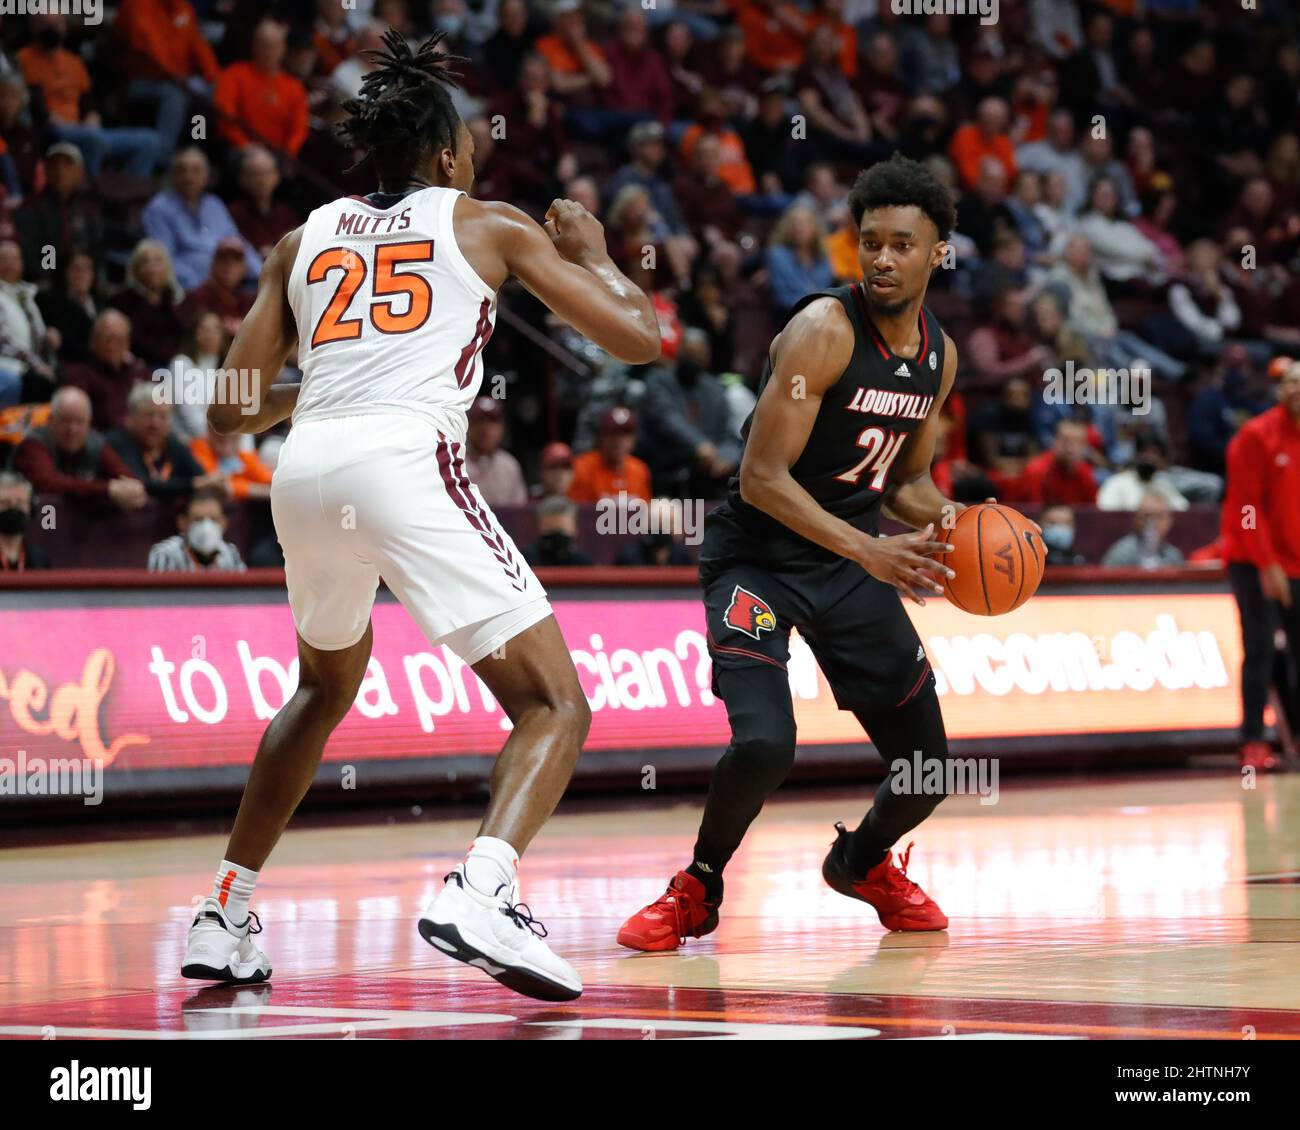 Blacksburg, Virginia, USA. 1st Mar, 2022. Louisville Cardinals forward  Jae'Lyn Withers (24) looks to drive during the NCAA Basketball game between  the Louisville Cardinals and the Virginia Tech Hokies at Cassell Coliseum